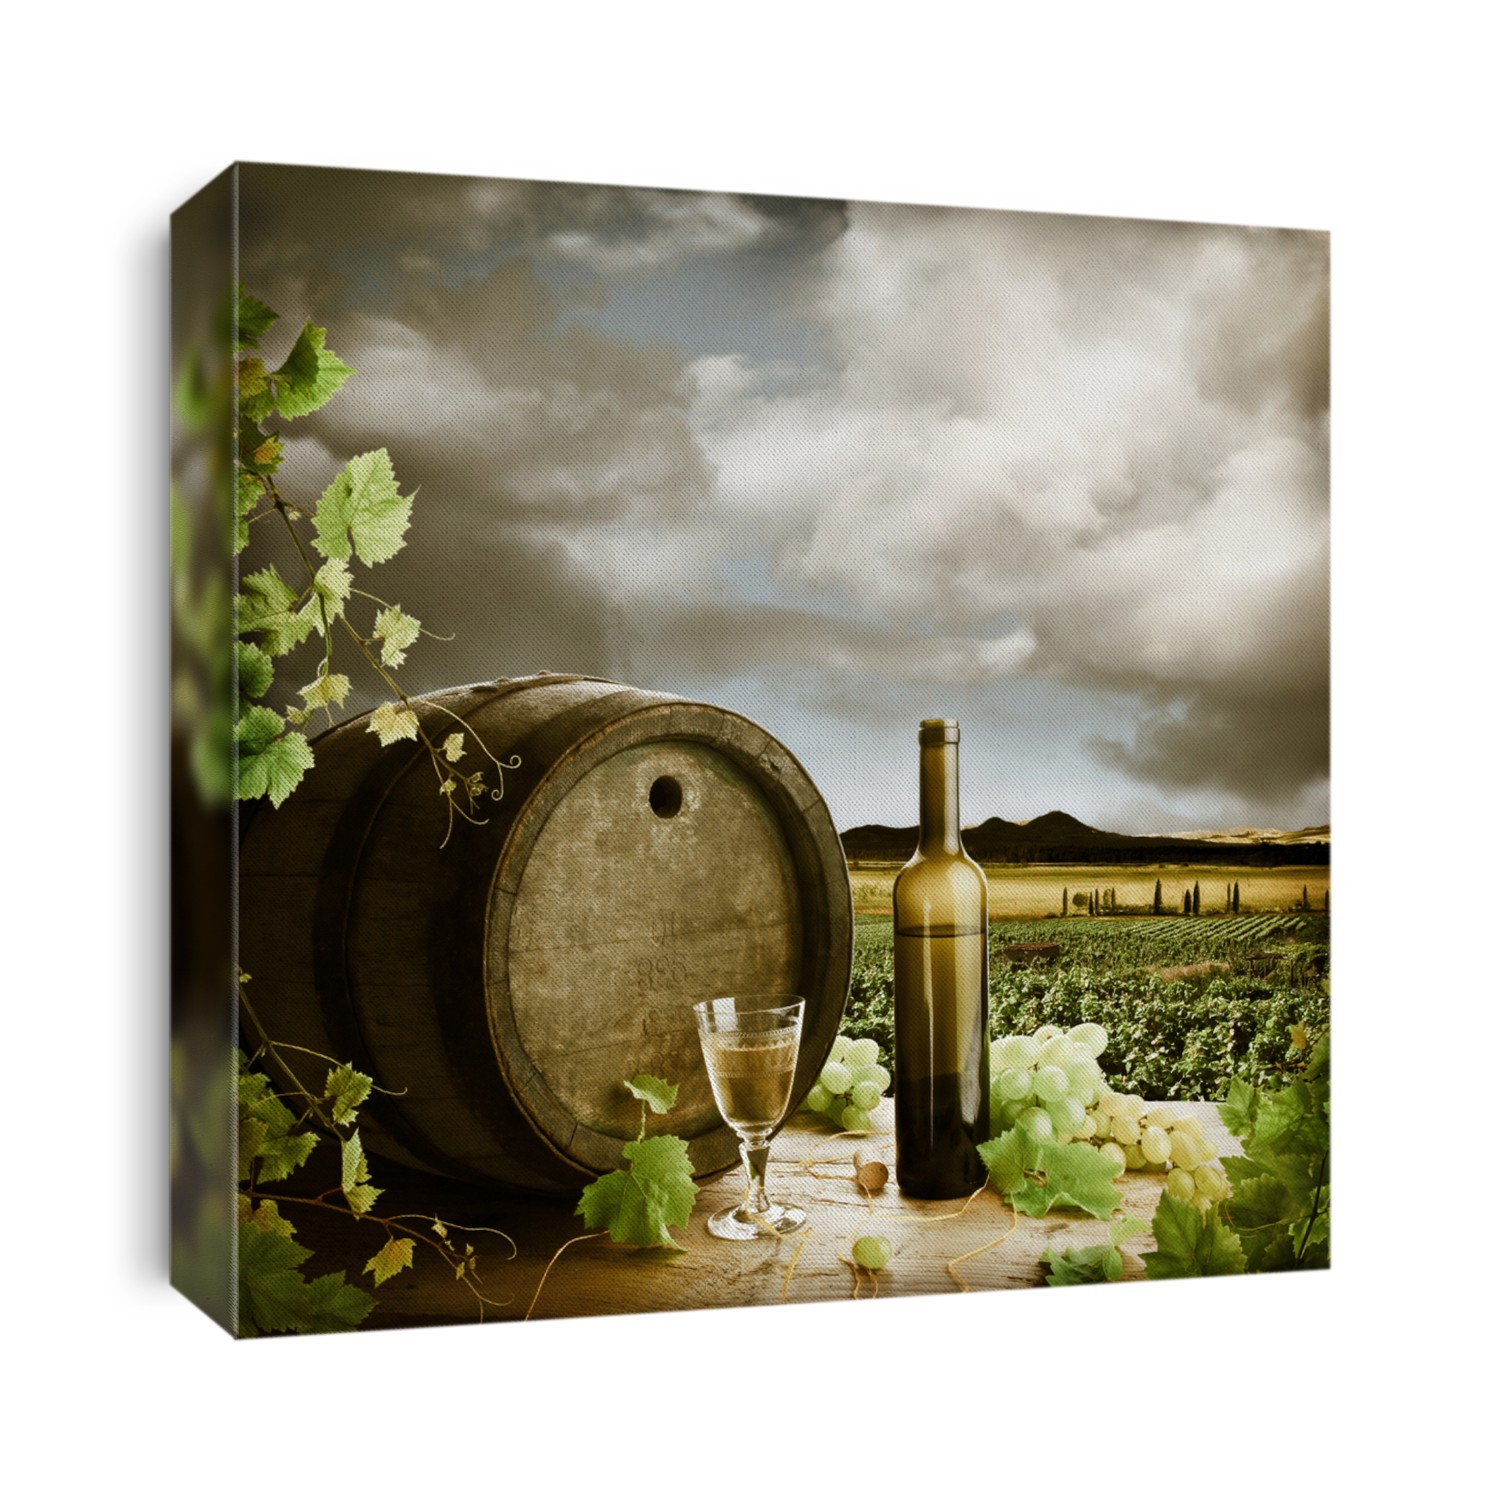 White wine and vineyard in vintage style